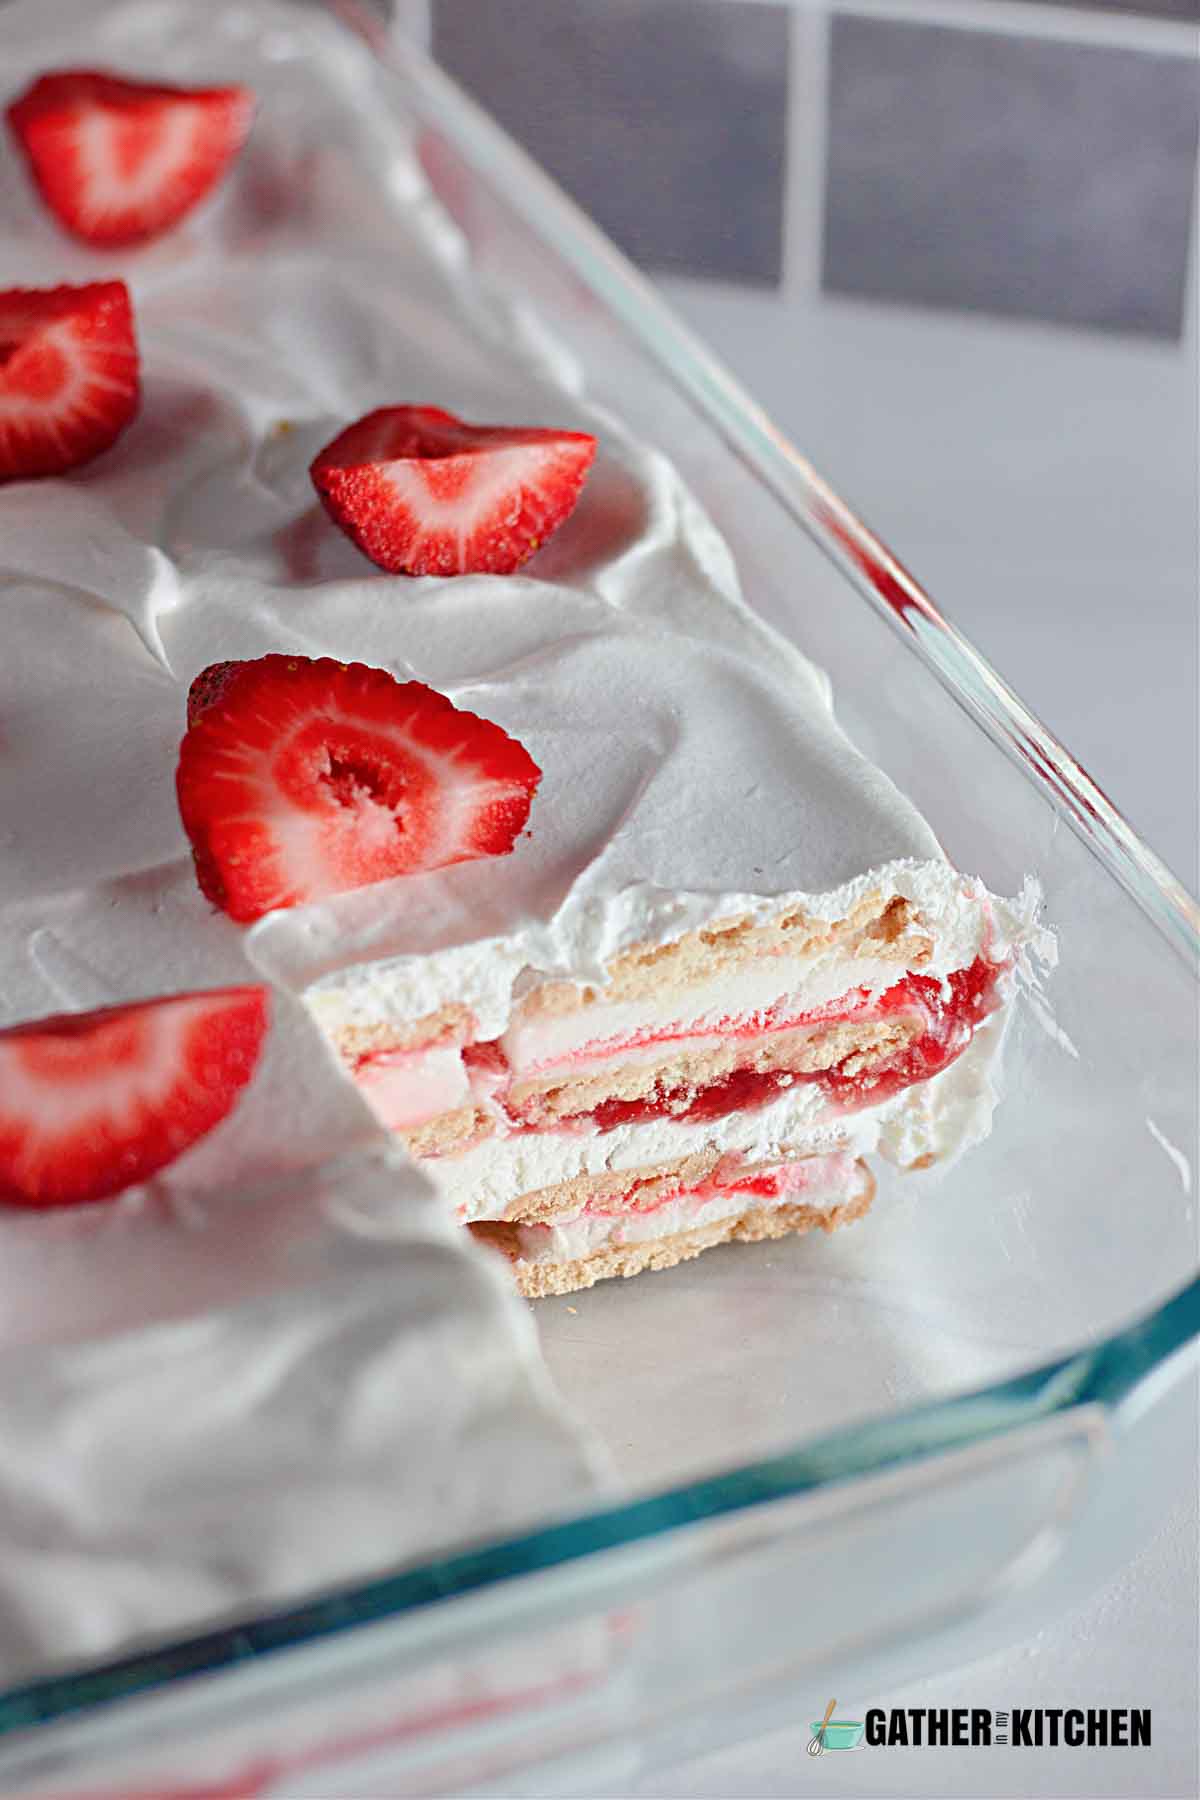 A closeup of a casserole dish of strawberry ice cream cake with a square slice taken out.